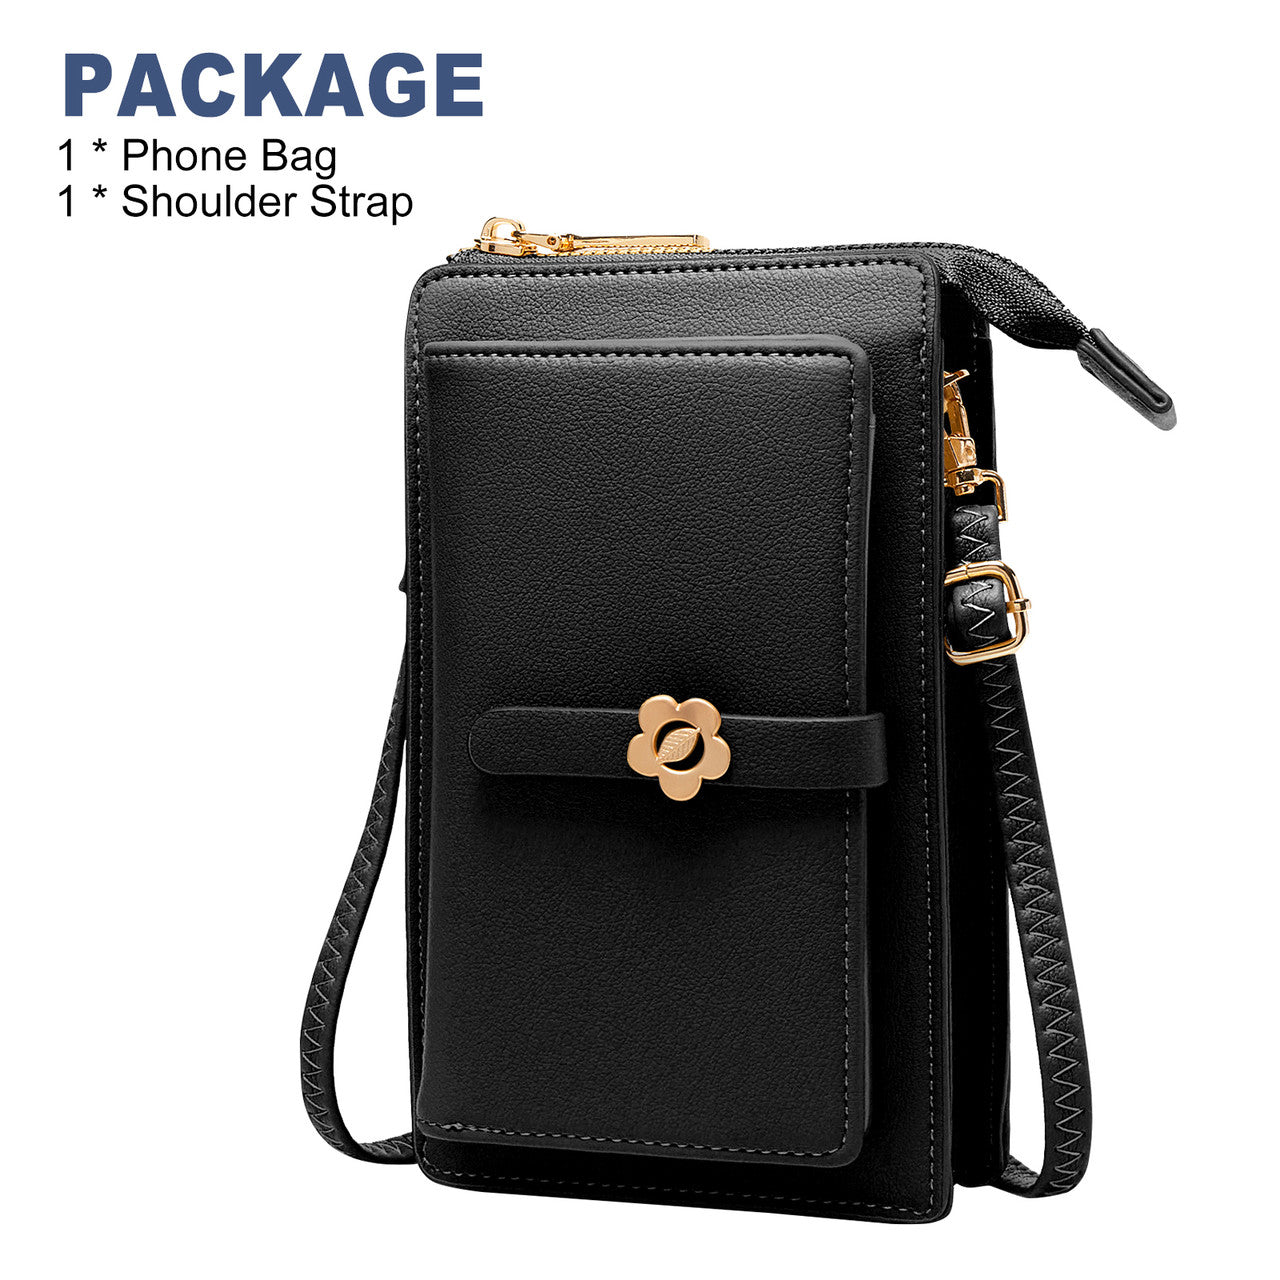 Women Small Cell Phone Purse Wallet Handbag with Adjustable Straps